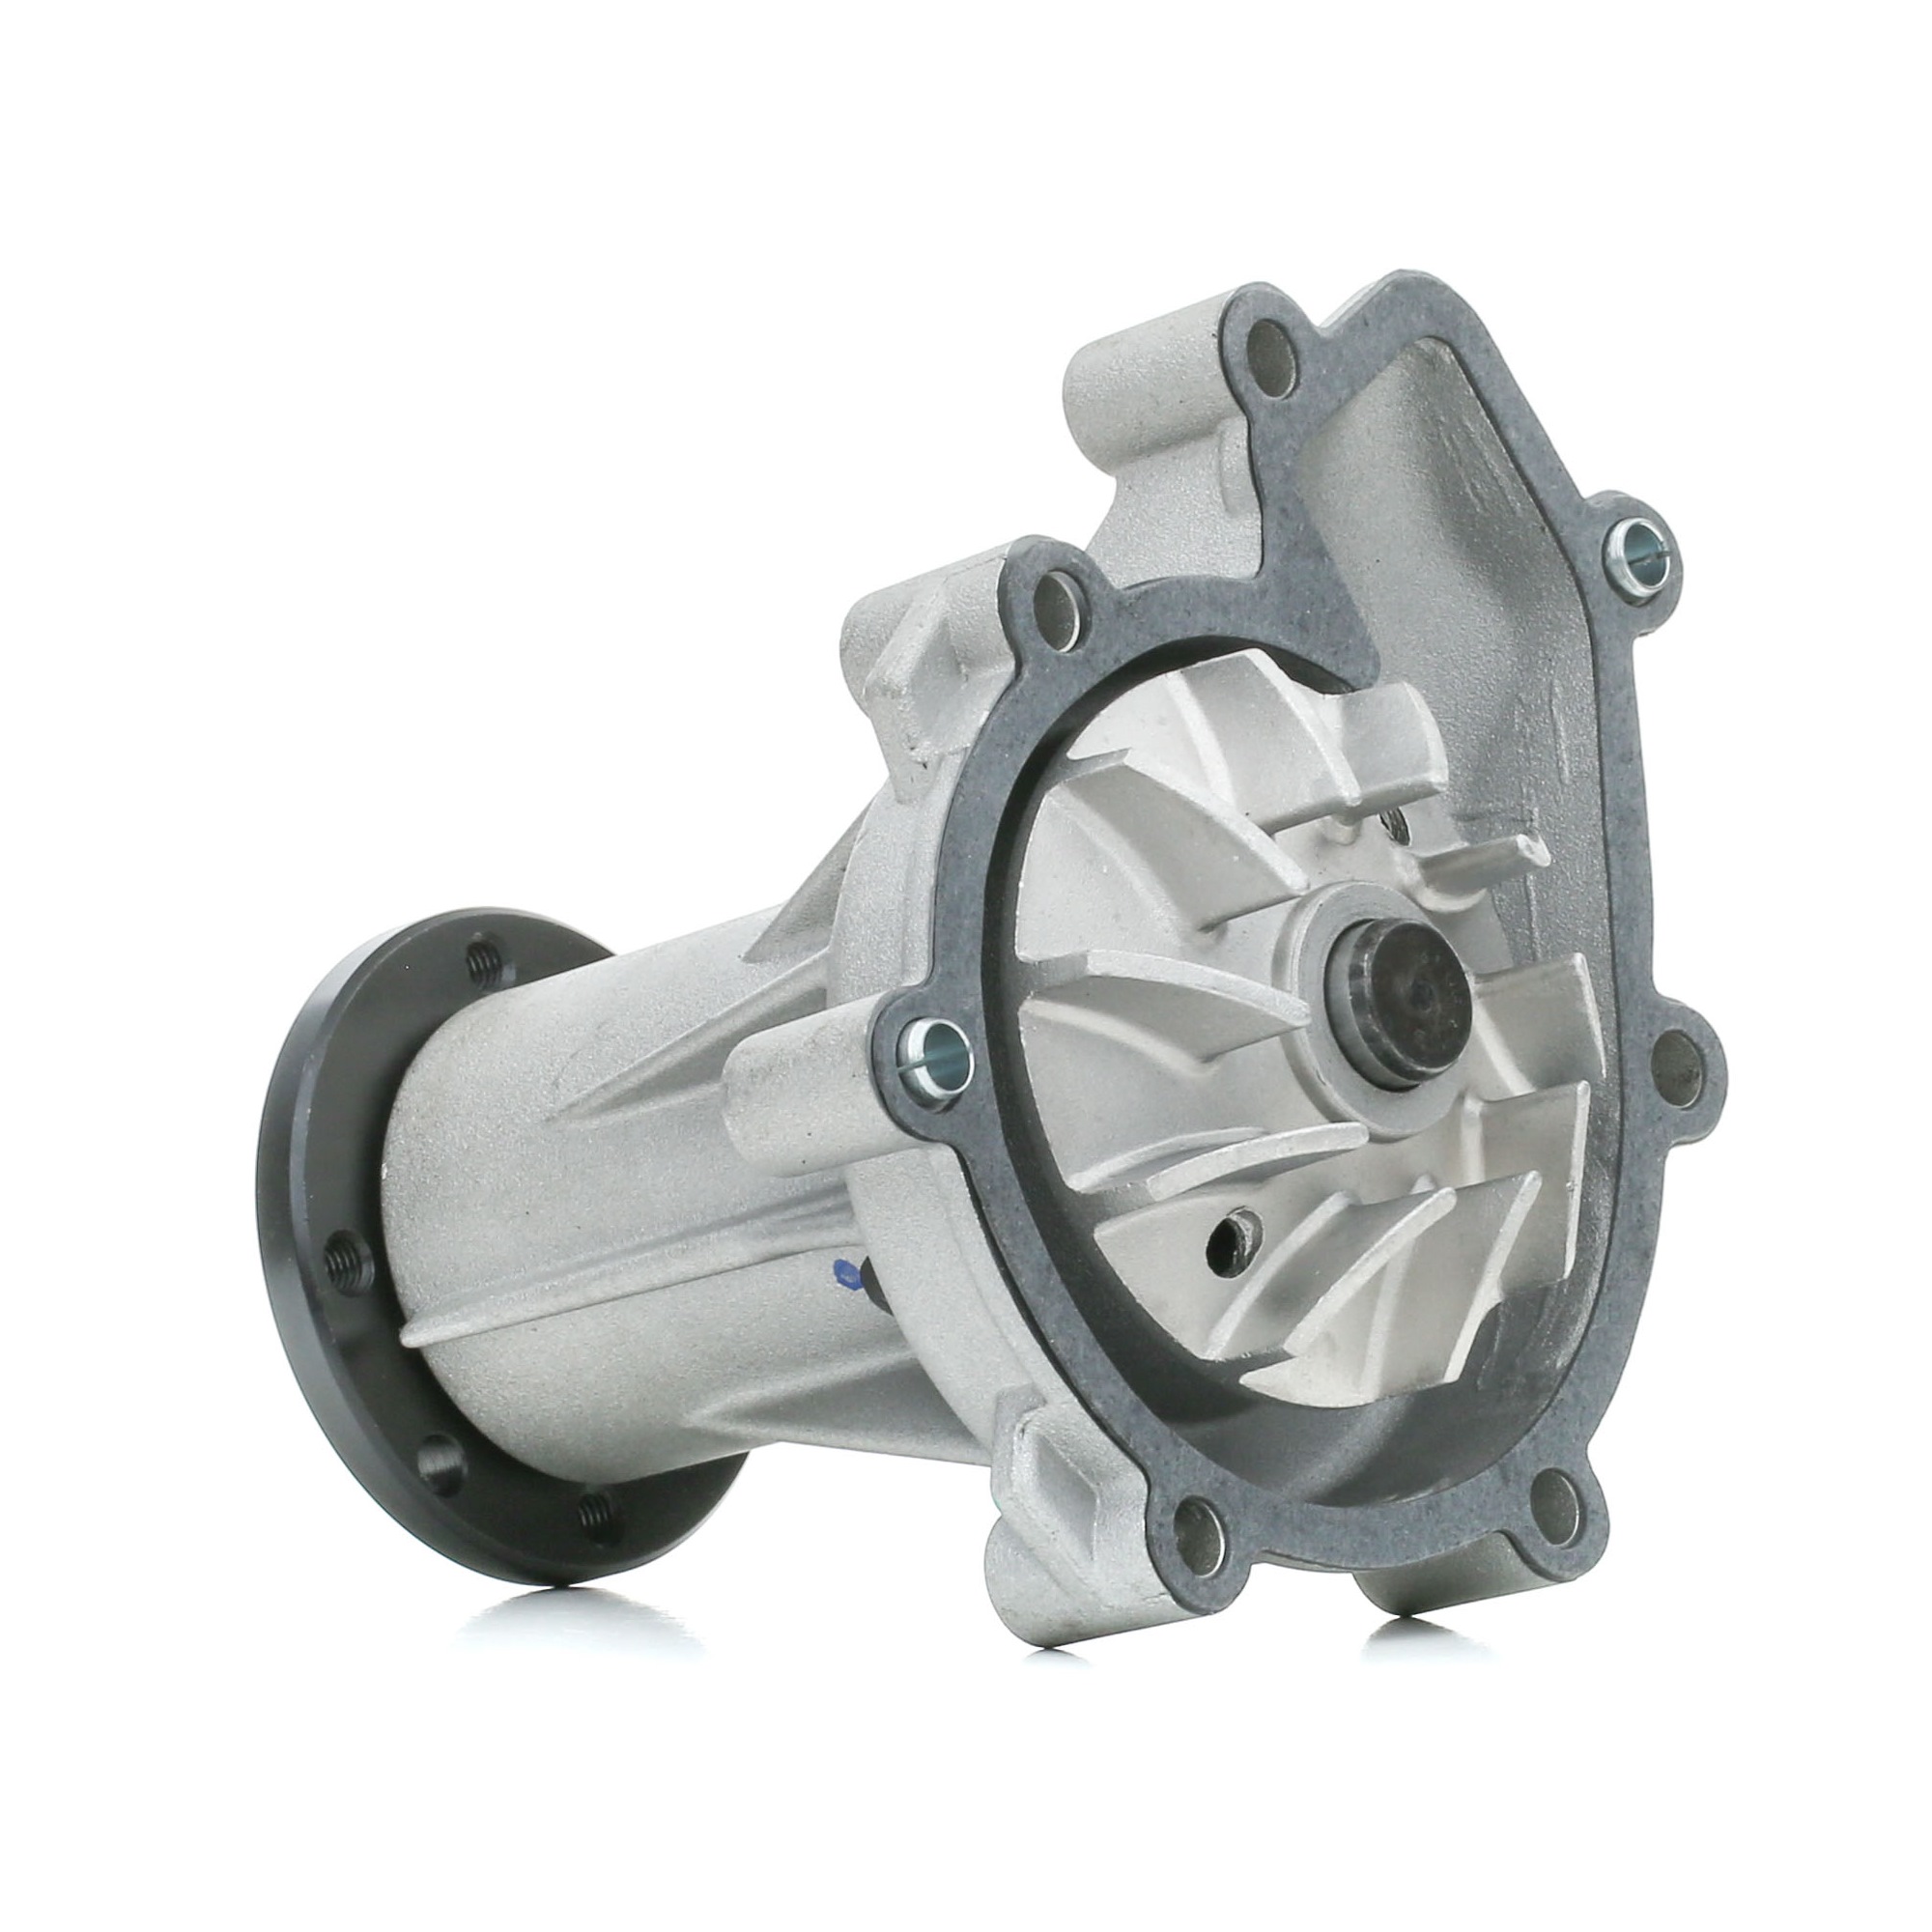 RIDEX 1260W0216 Water pump Cast Aluminium, without belt pulley, with seal, with flange, Mechanical, Metal impeller, for v-ribbed belt use